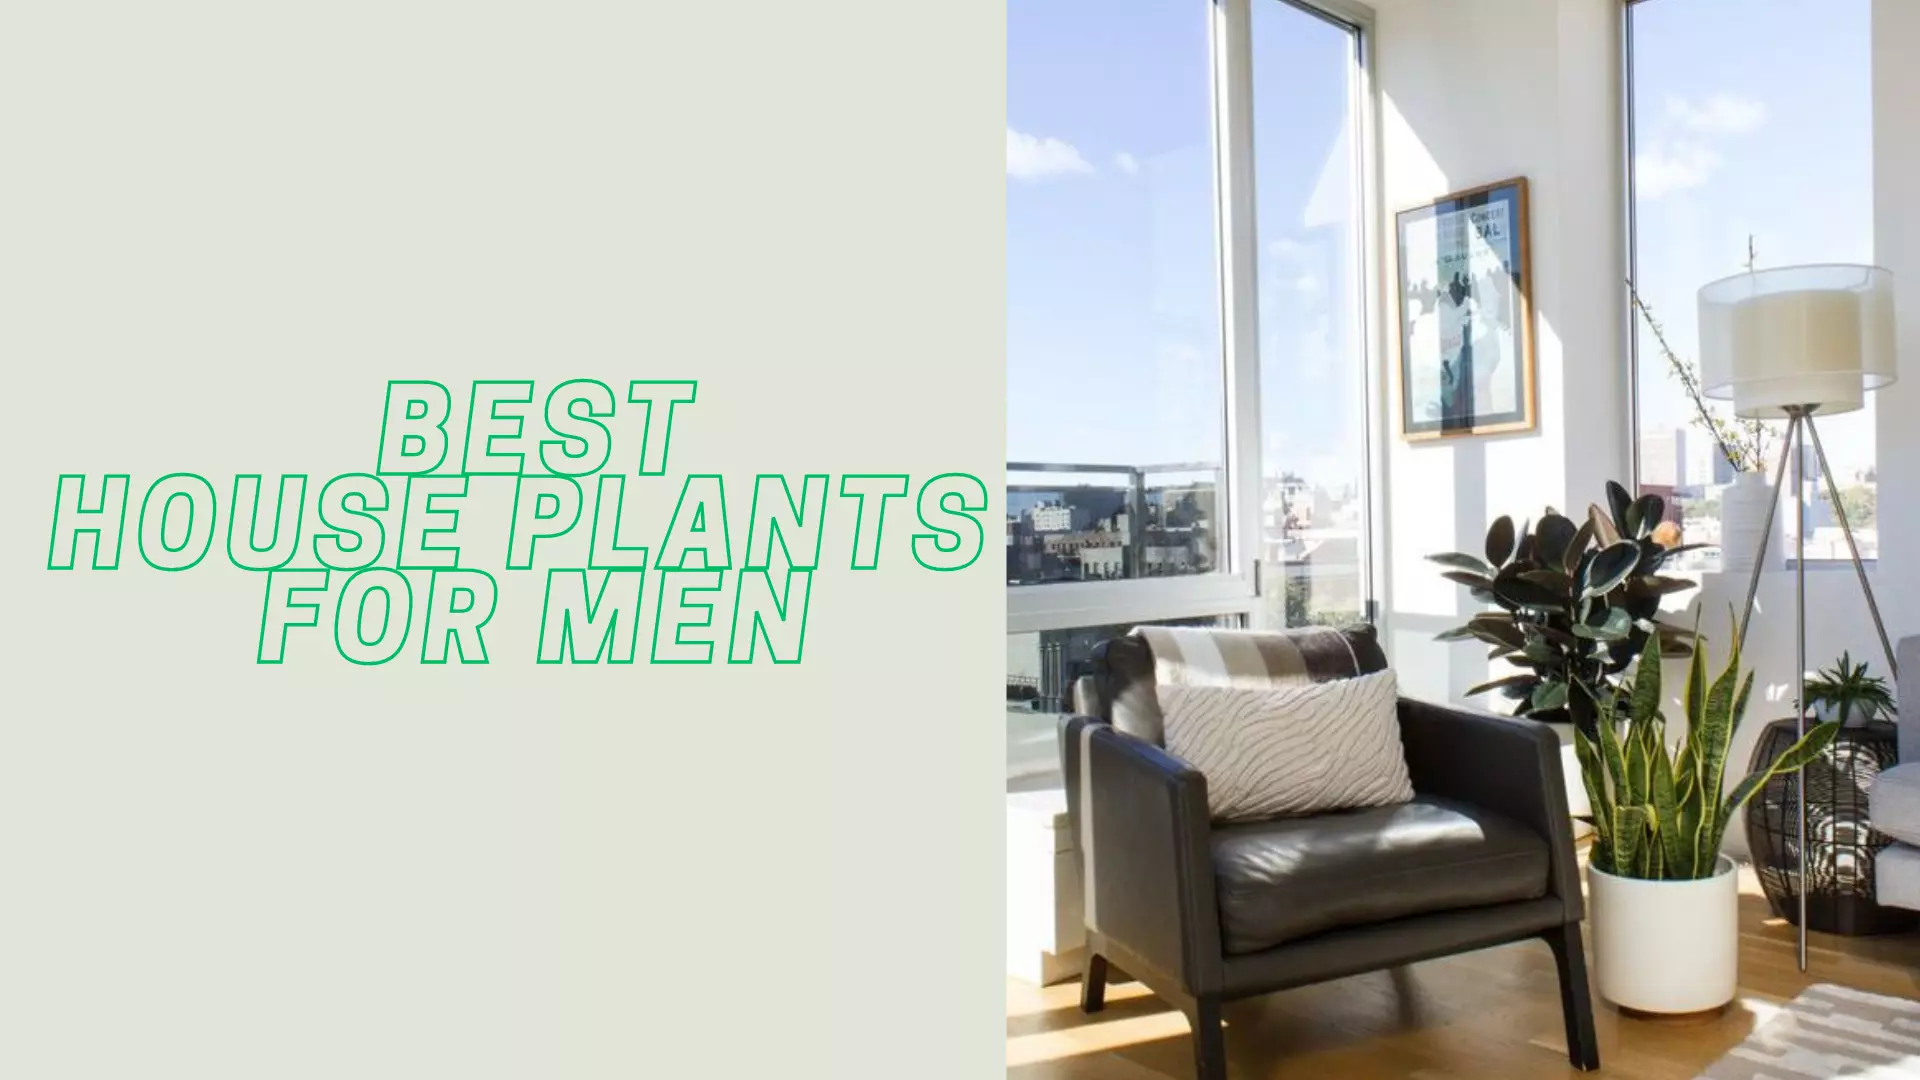 Top 10 Easy Care Masculine Plants For Men